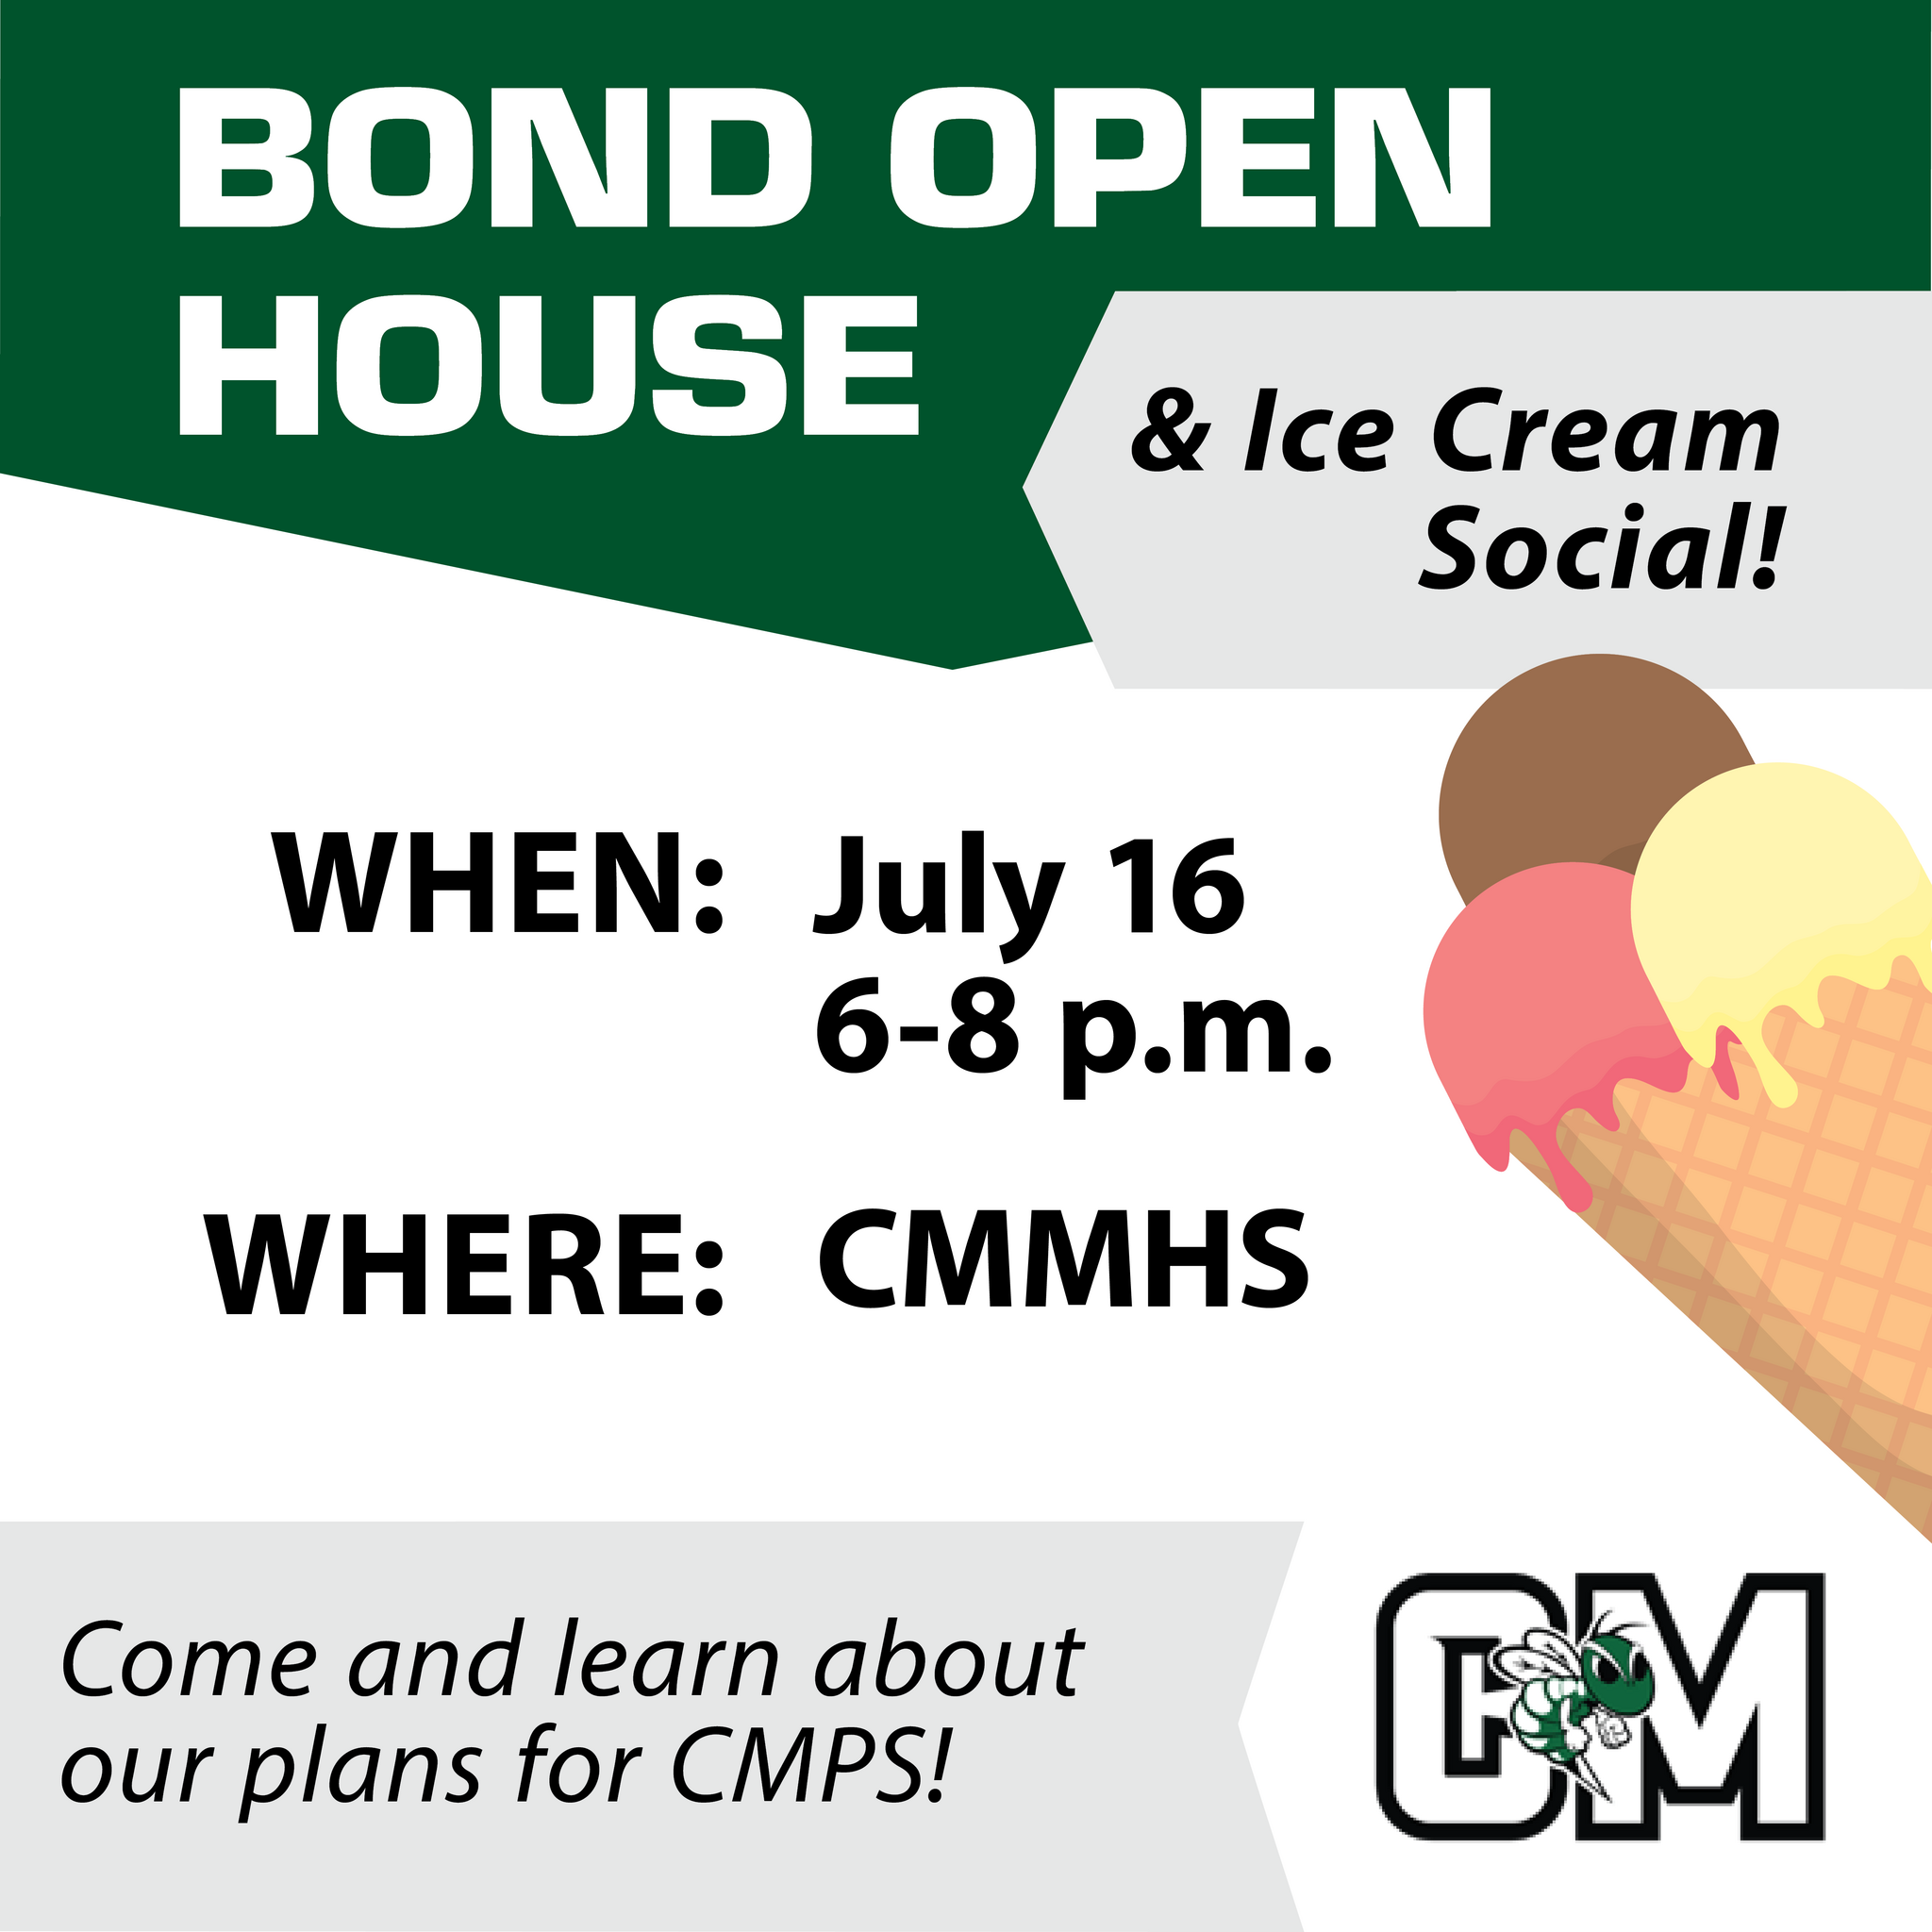 BOND OPEN HOUSE AND ICE CREAM SOCIAL July 16 6-8 pm at the Middle-High School. Come and learn about our plans for CMPS!